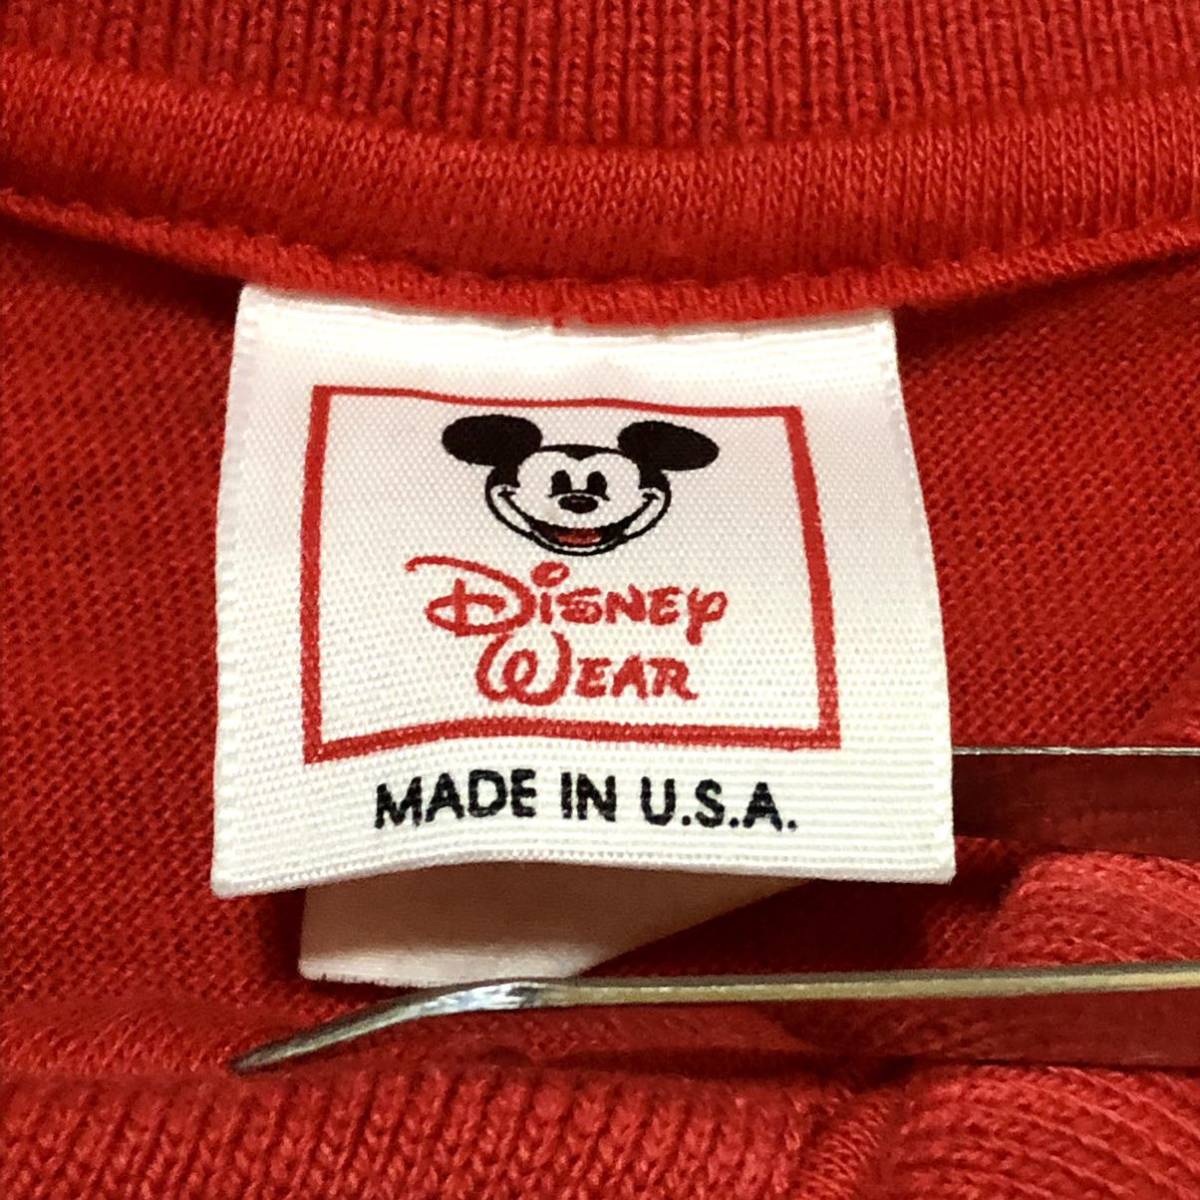 Made in USA ミッキーマウス ポーダー ポロシャツ 検索:古着 ディズニー Mickey Mouse Disney_画像5